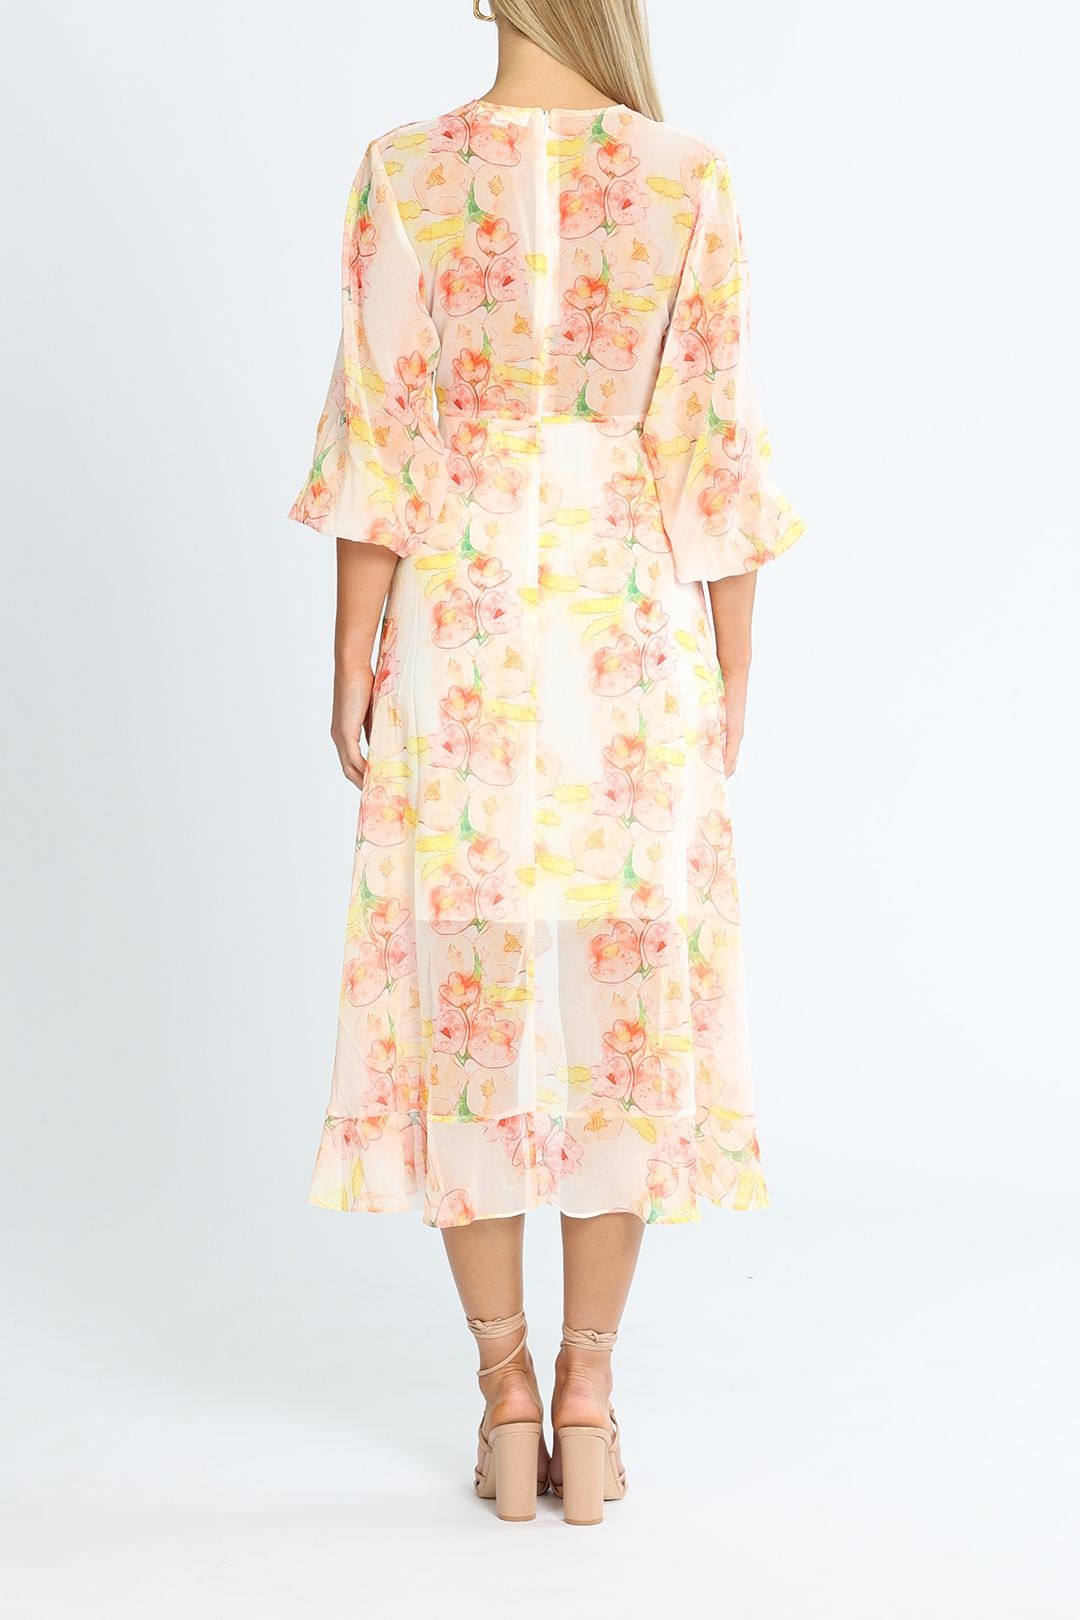 Belle and Bloom Beautiful Escape Dress Floral Midi